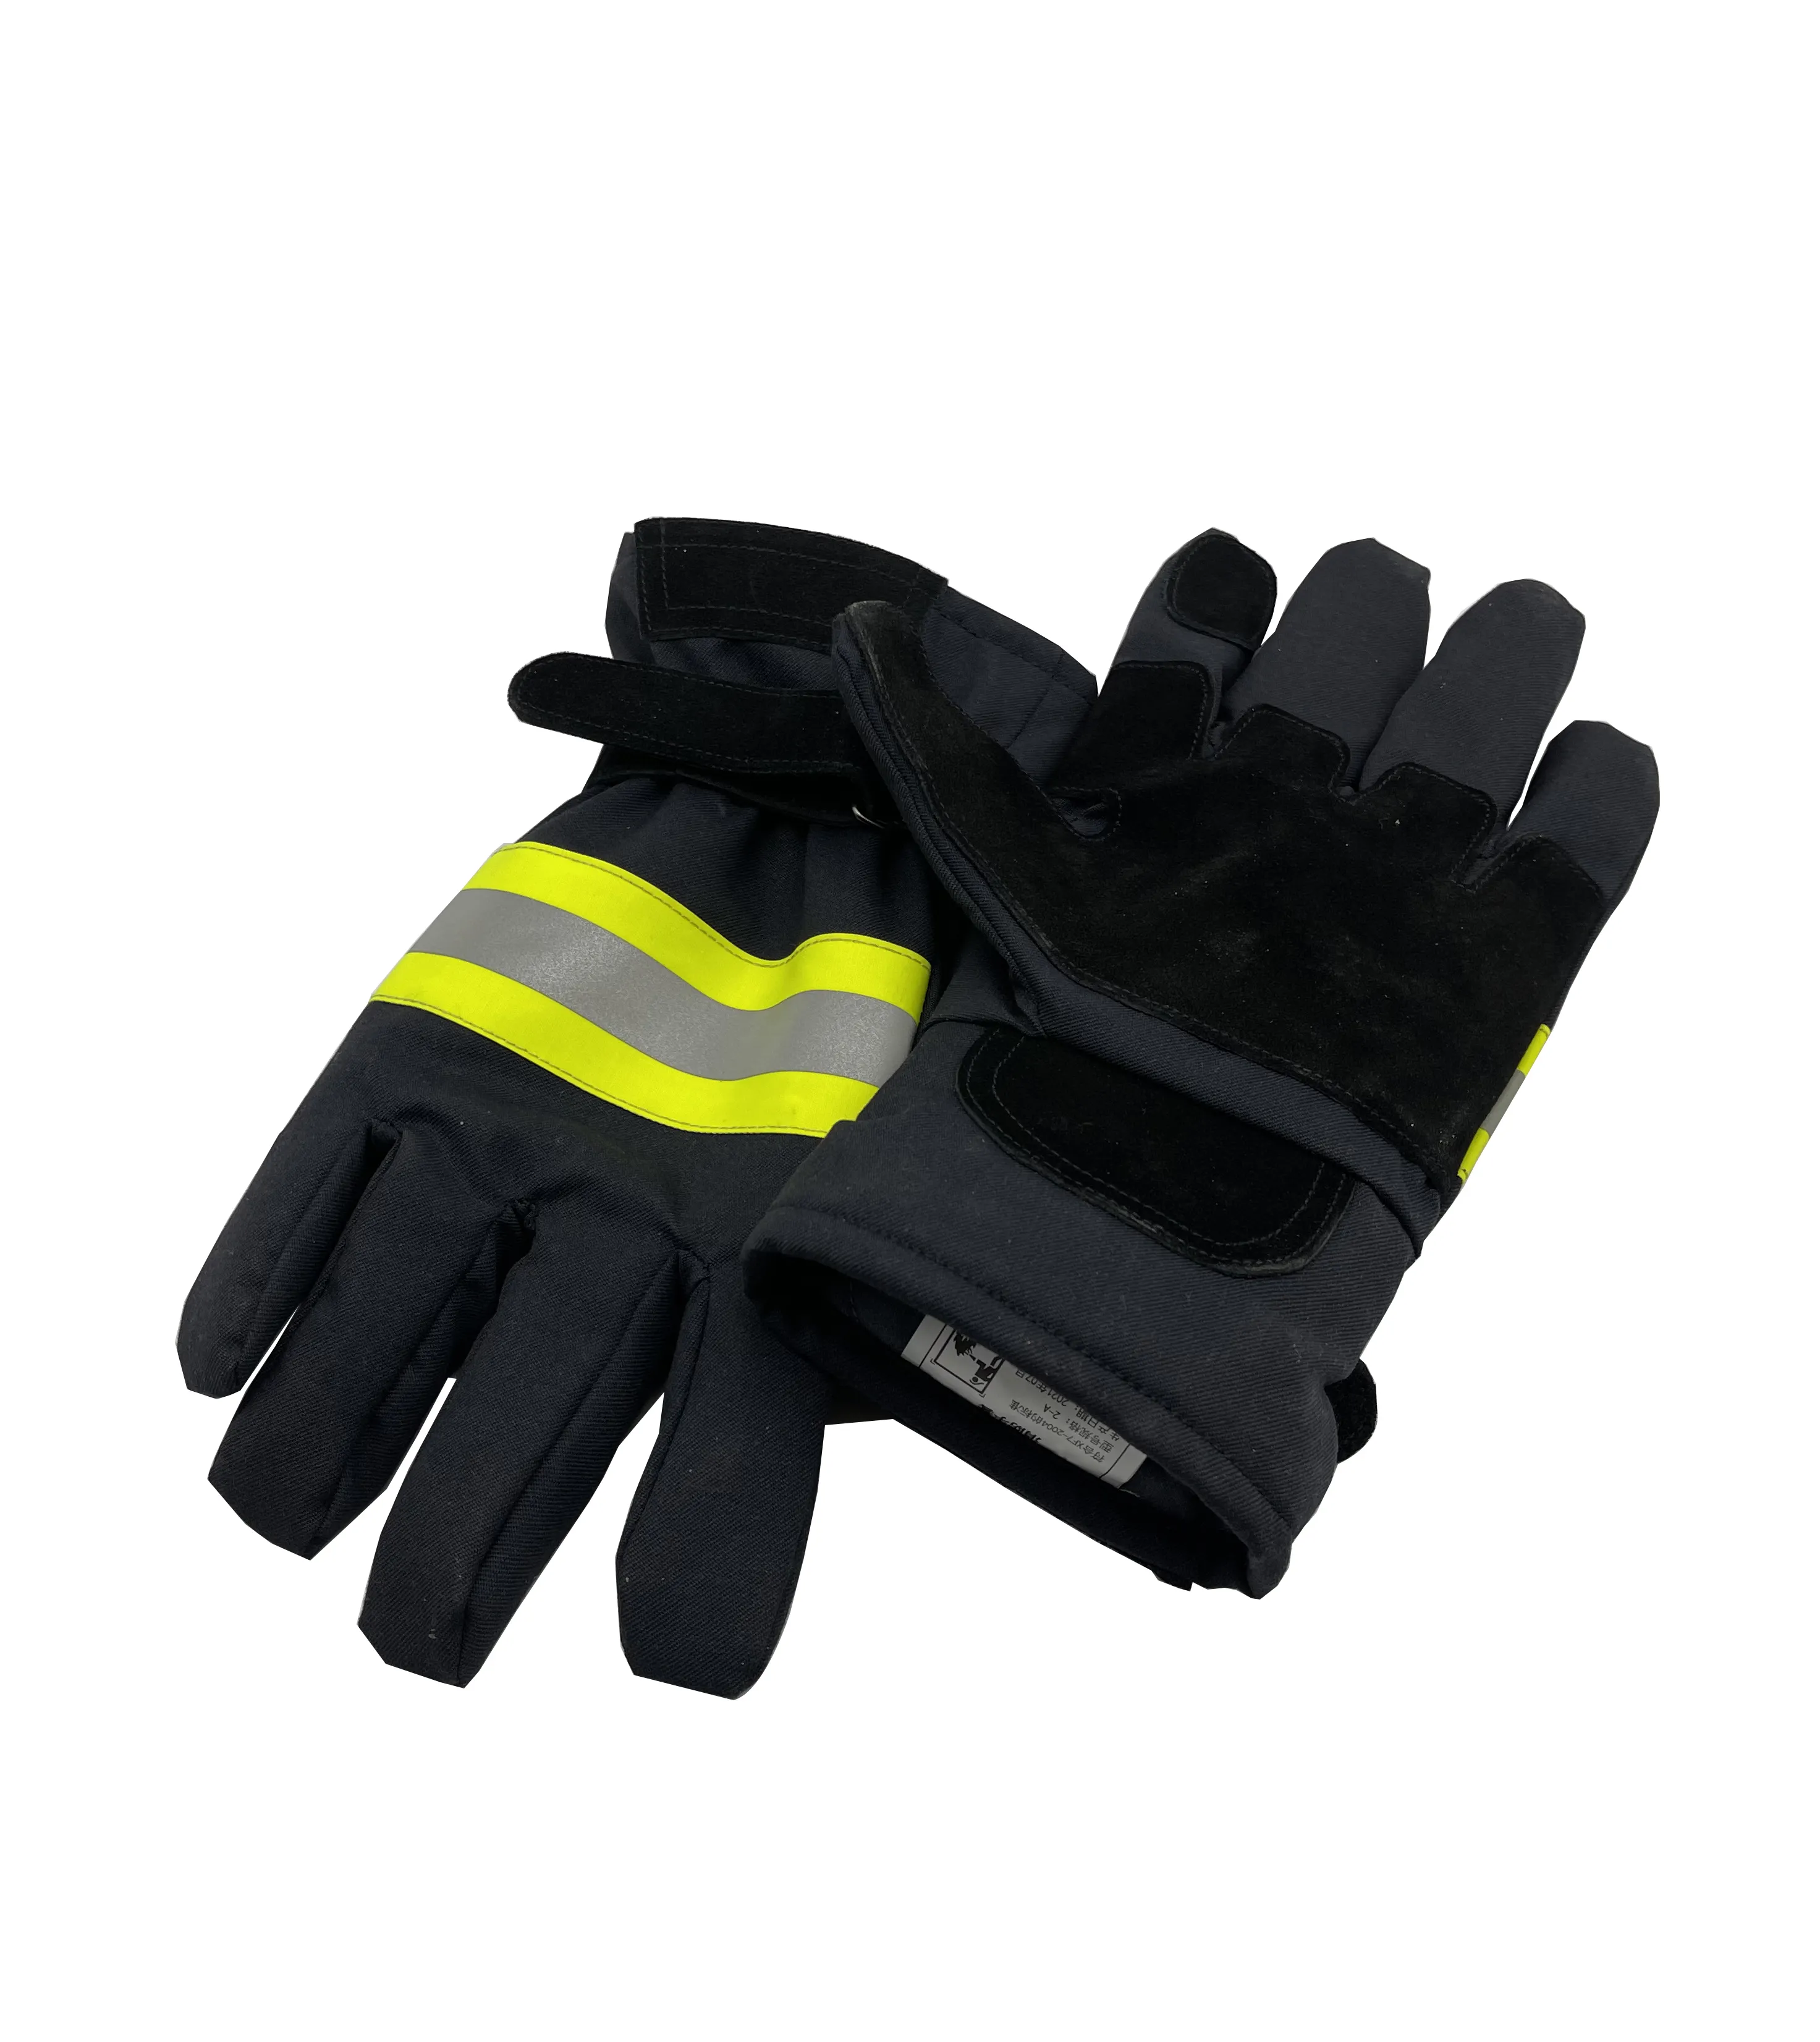 Firefighter's Hand Protective Equipment Fireproof Gloves